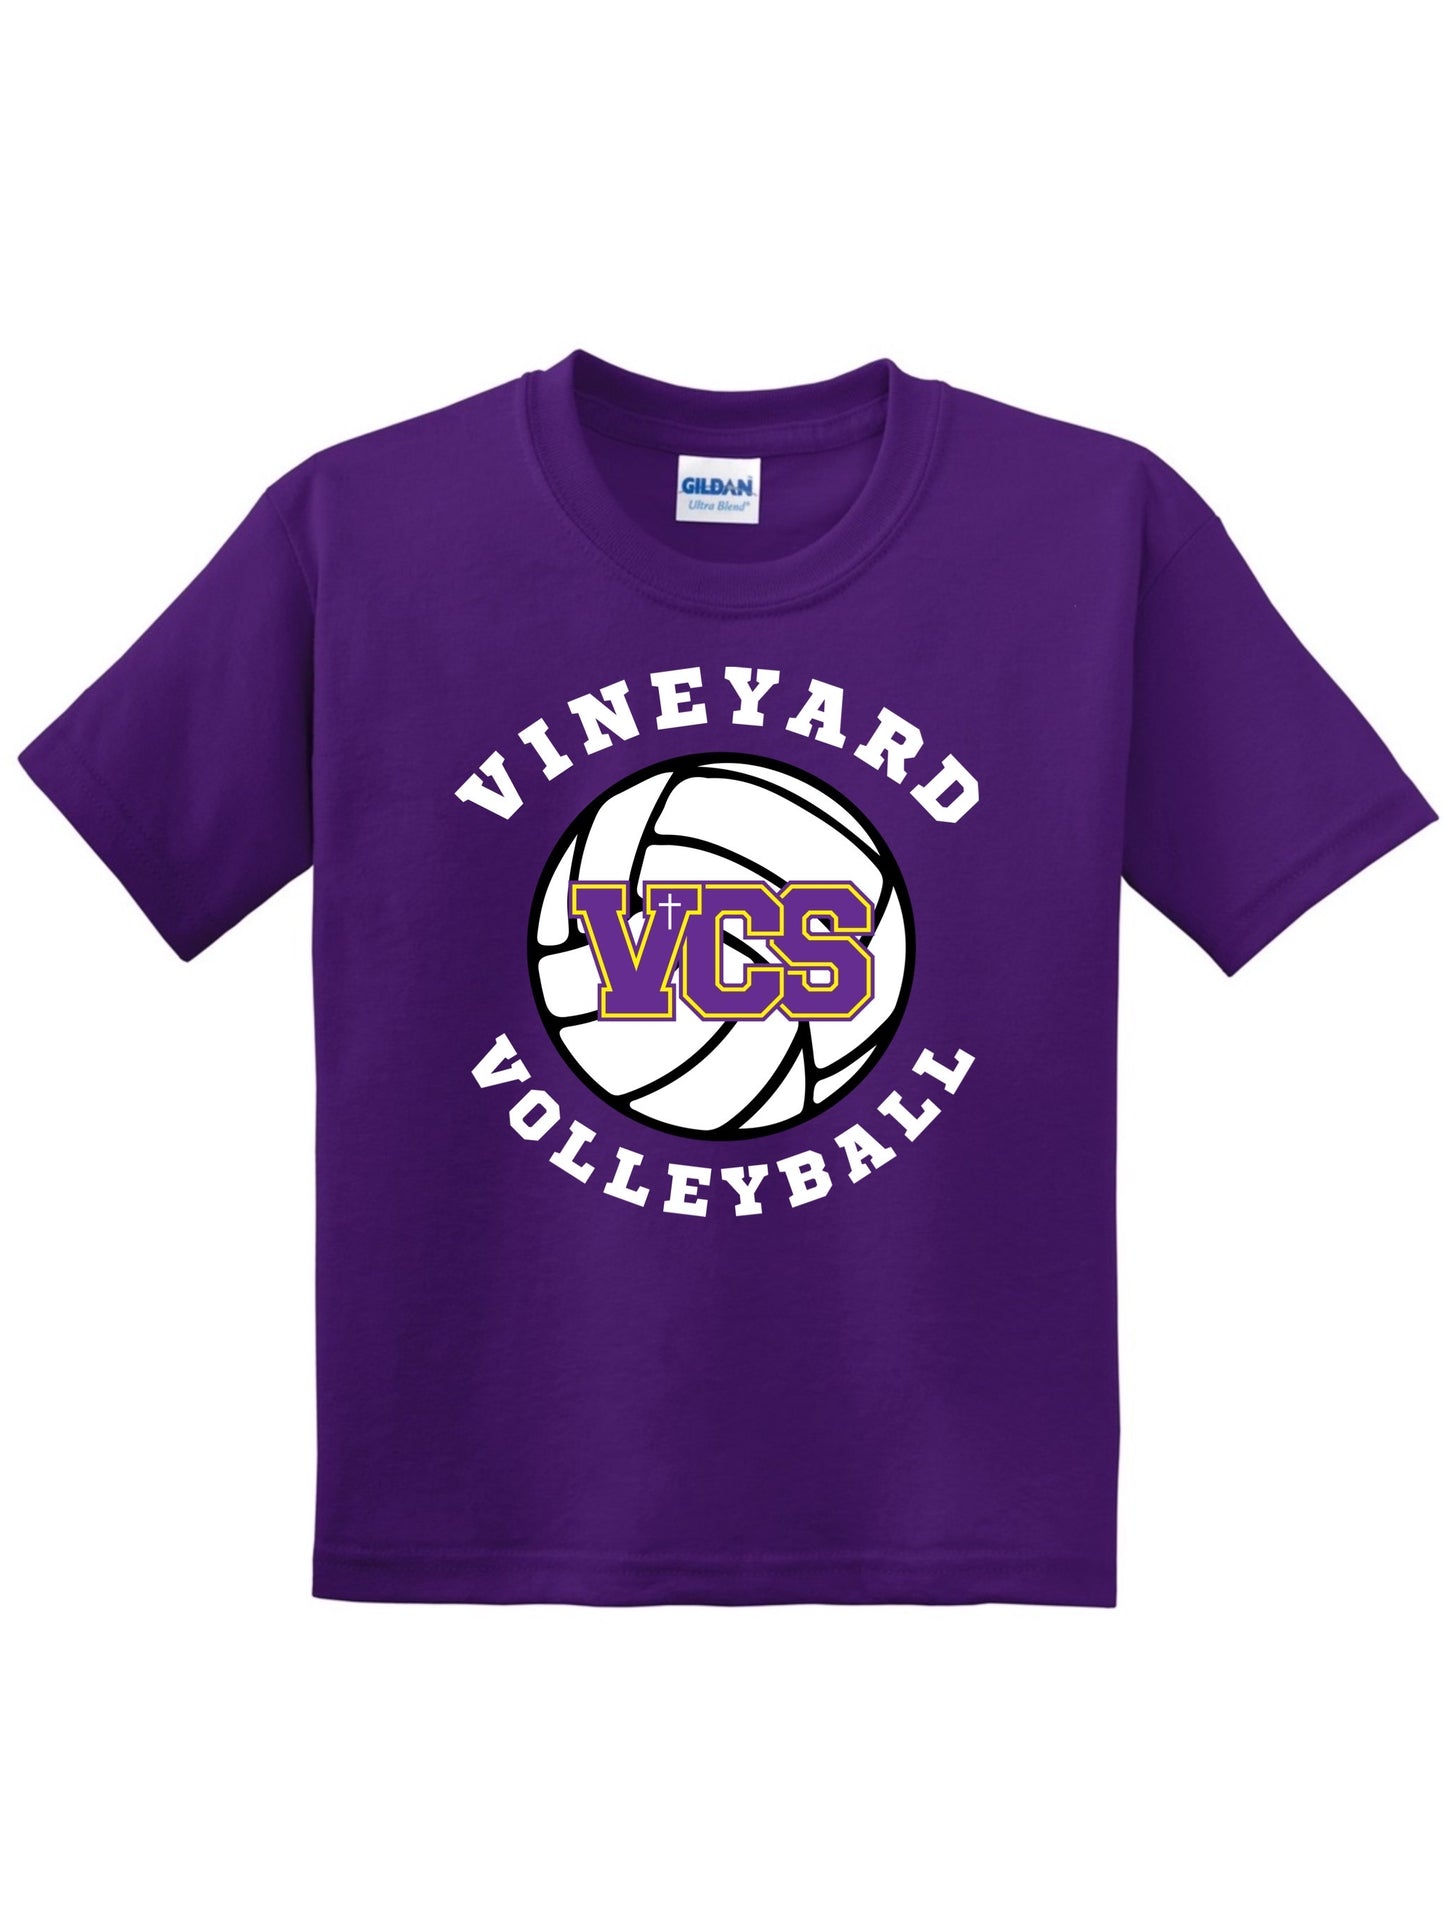 Volleyball PLAYER tee - pre order